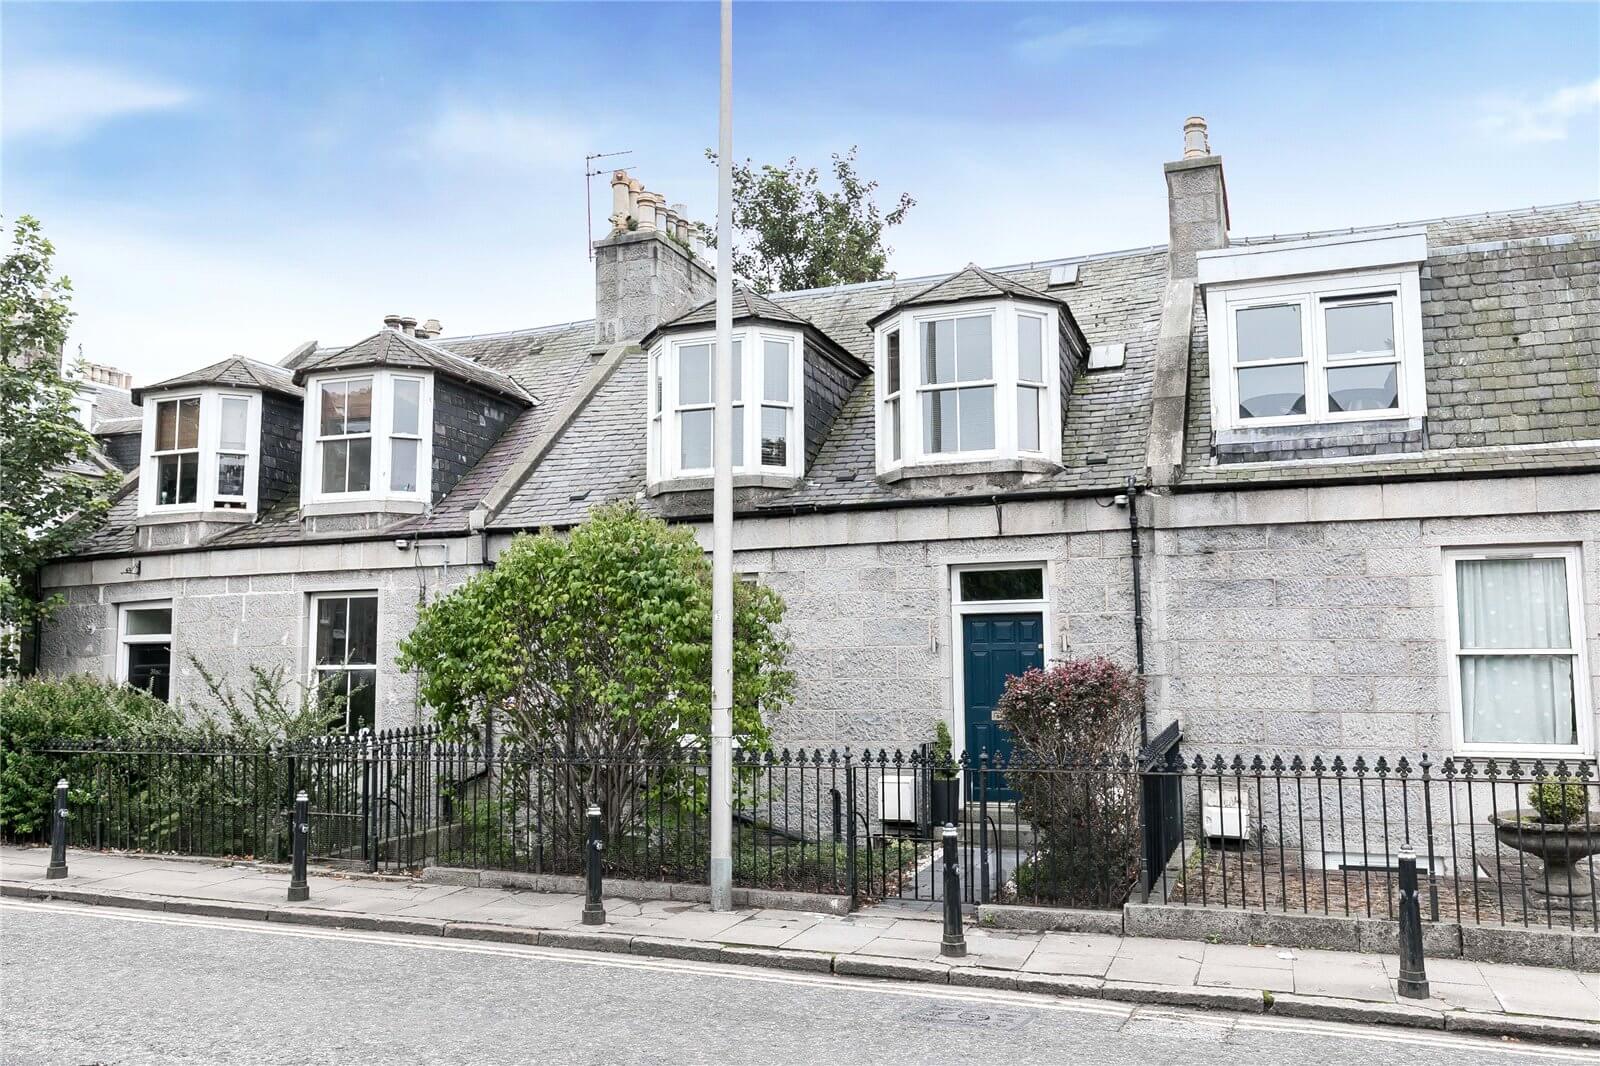 Our latest properties for sale and to let (6th September 2019)